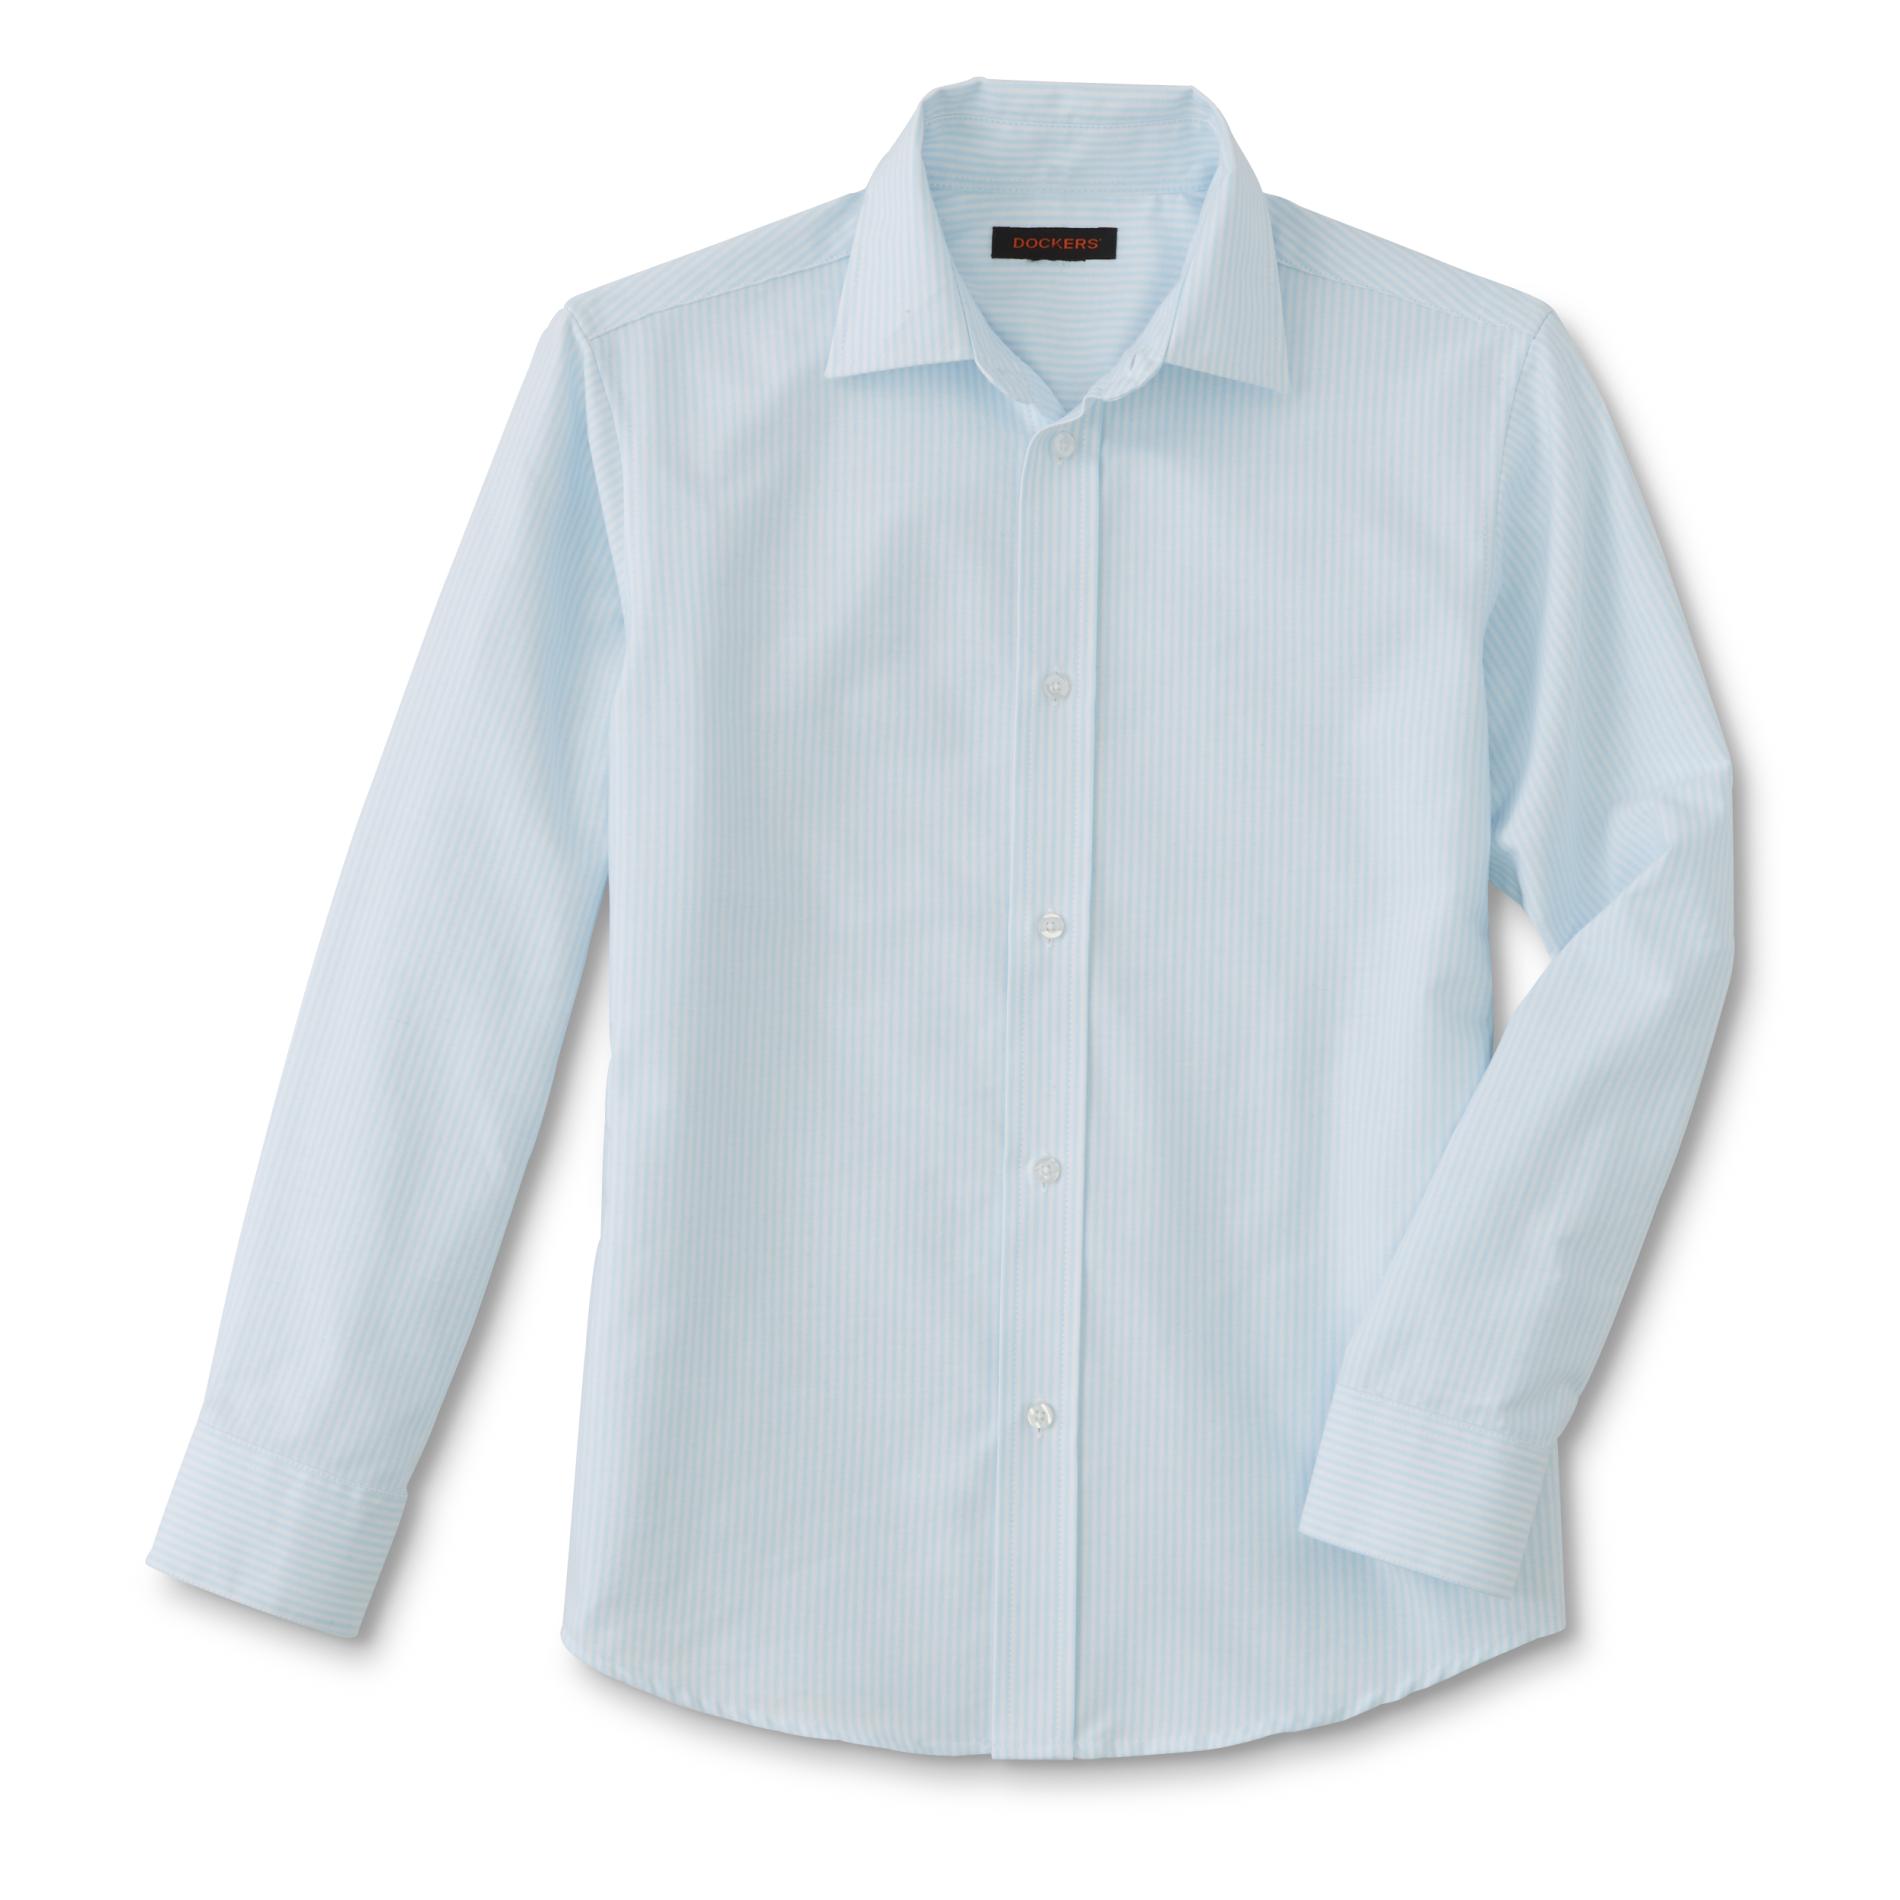 Dockers Boys' Button-Front Shirt - Striped